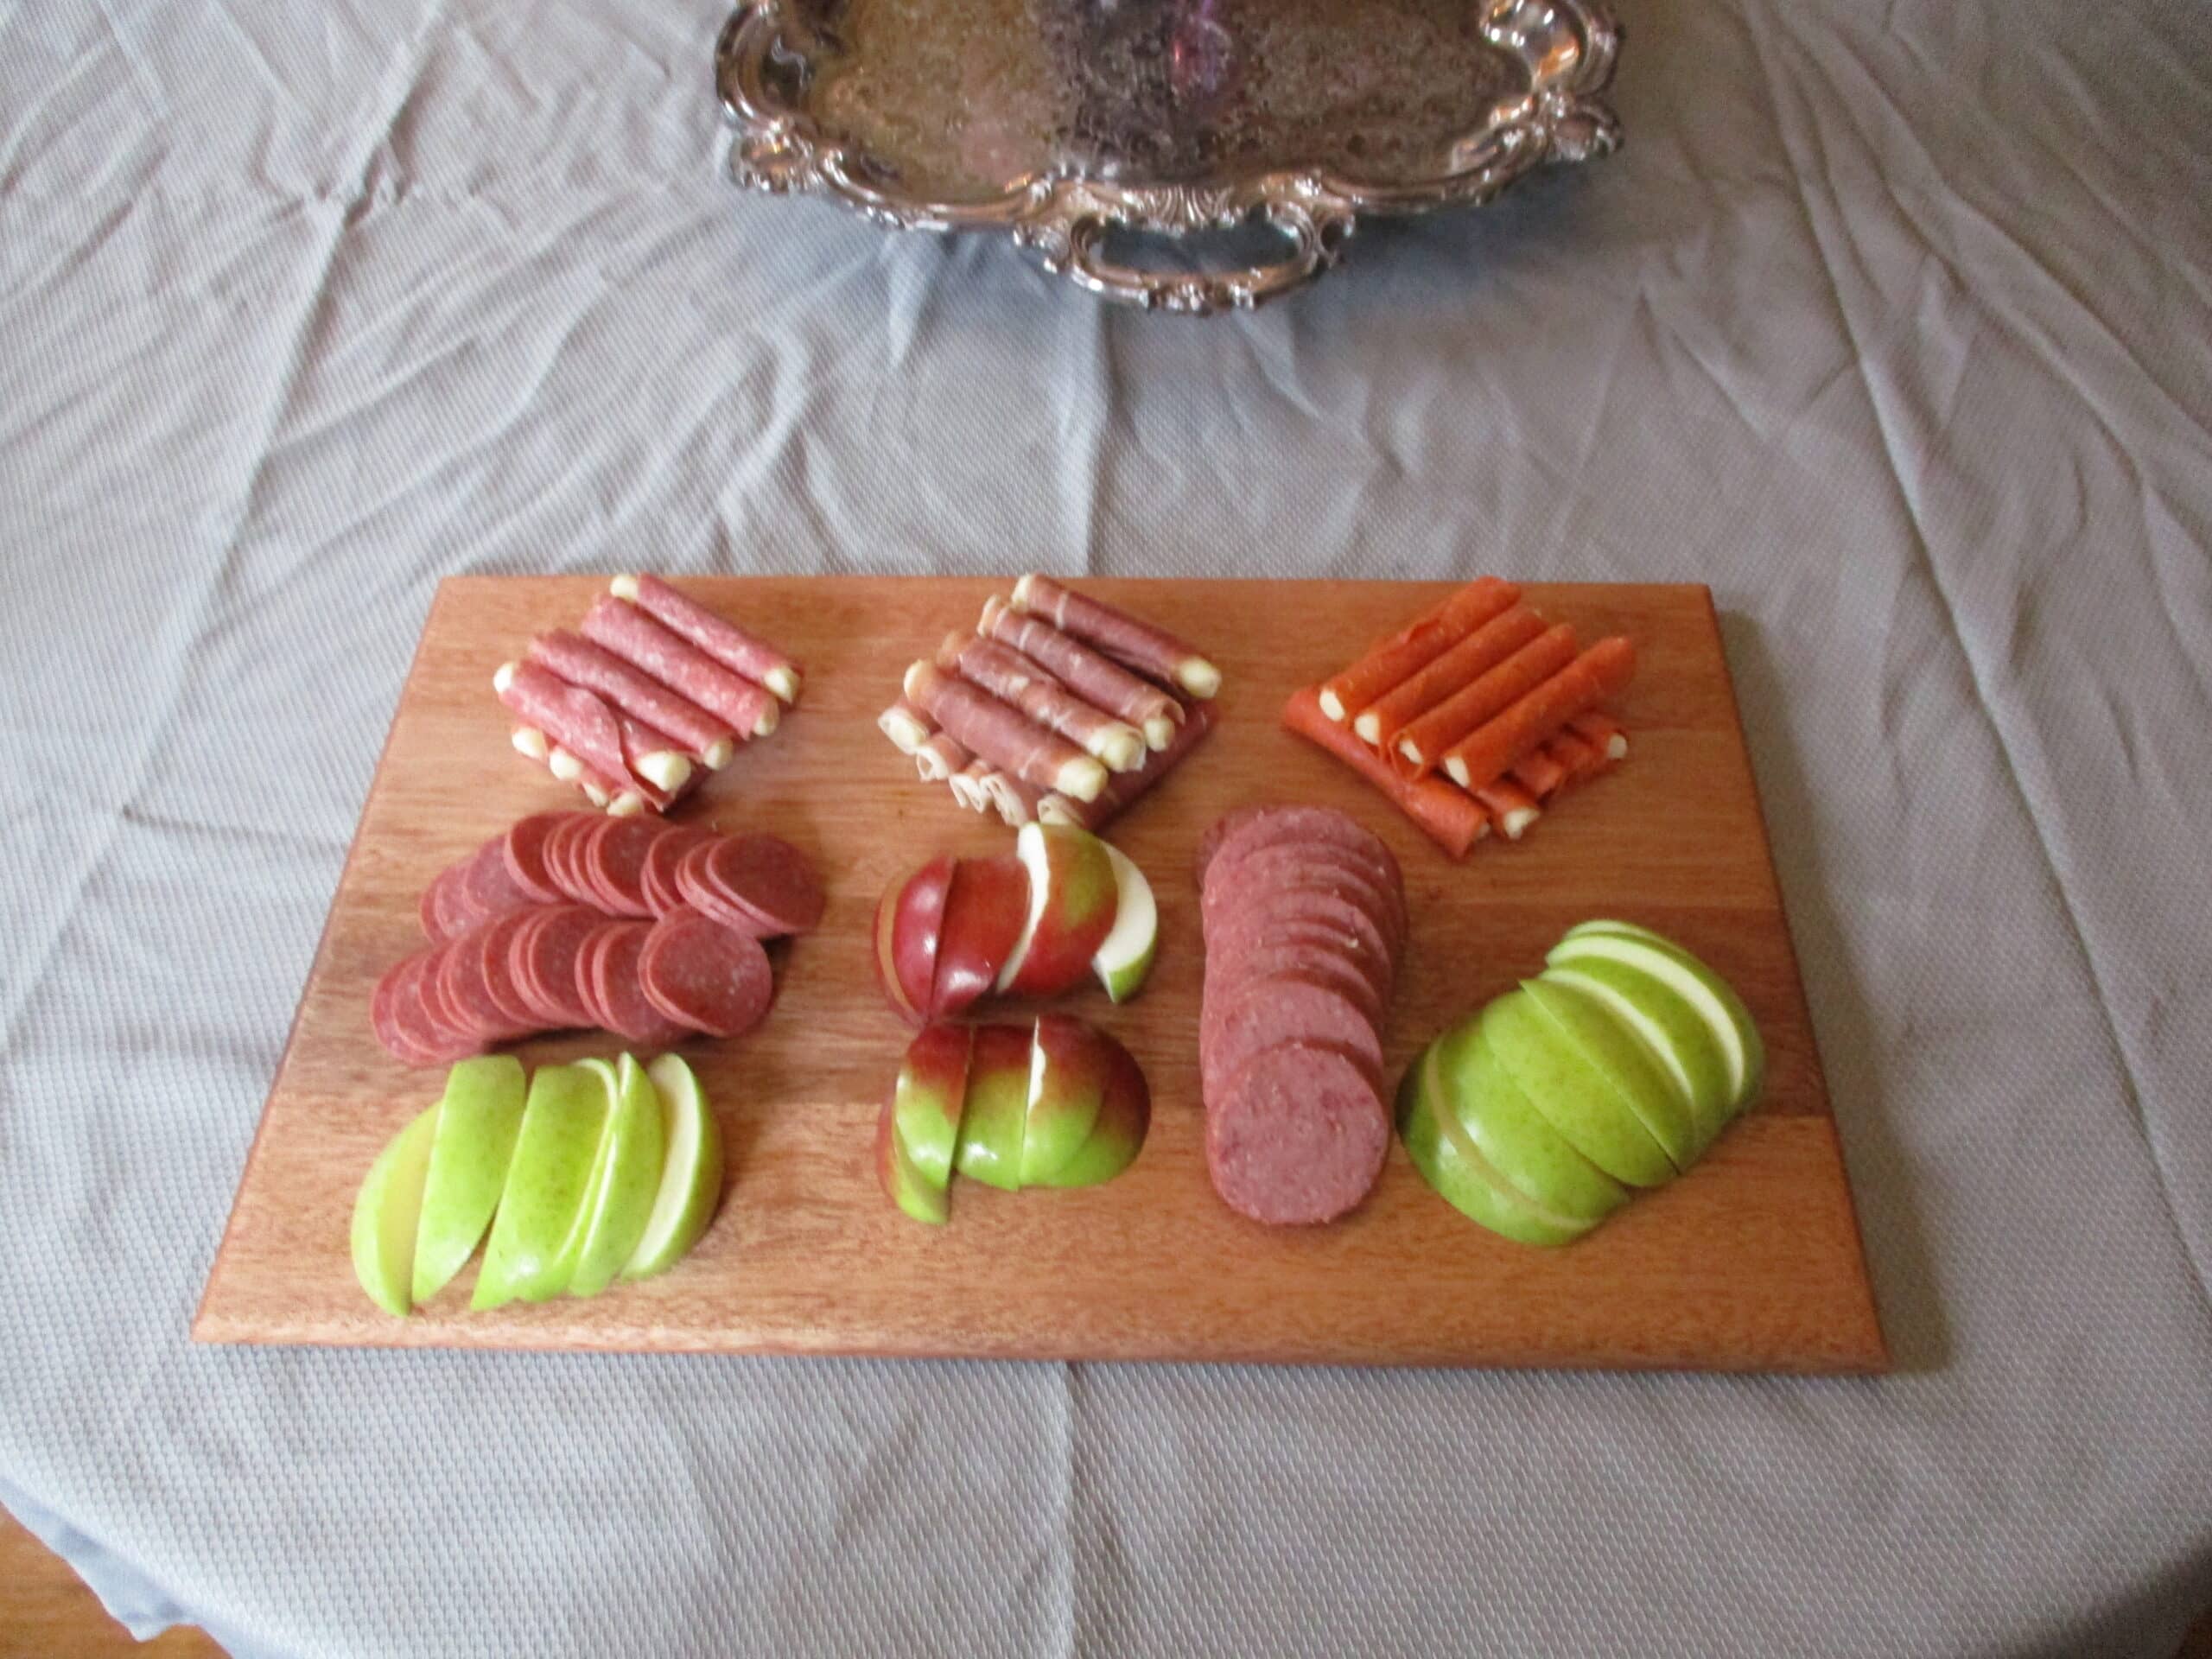 Custom Mahogany cutting board/charcuterie board as a housewarming gift pictured with fruit and cured meats.